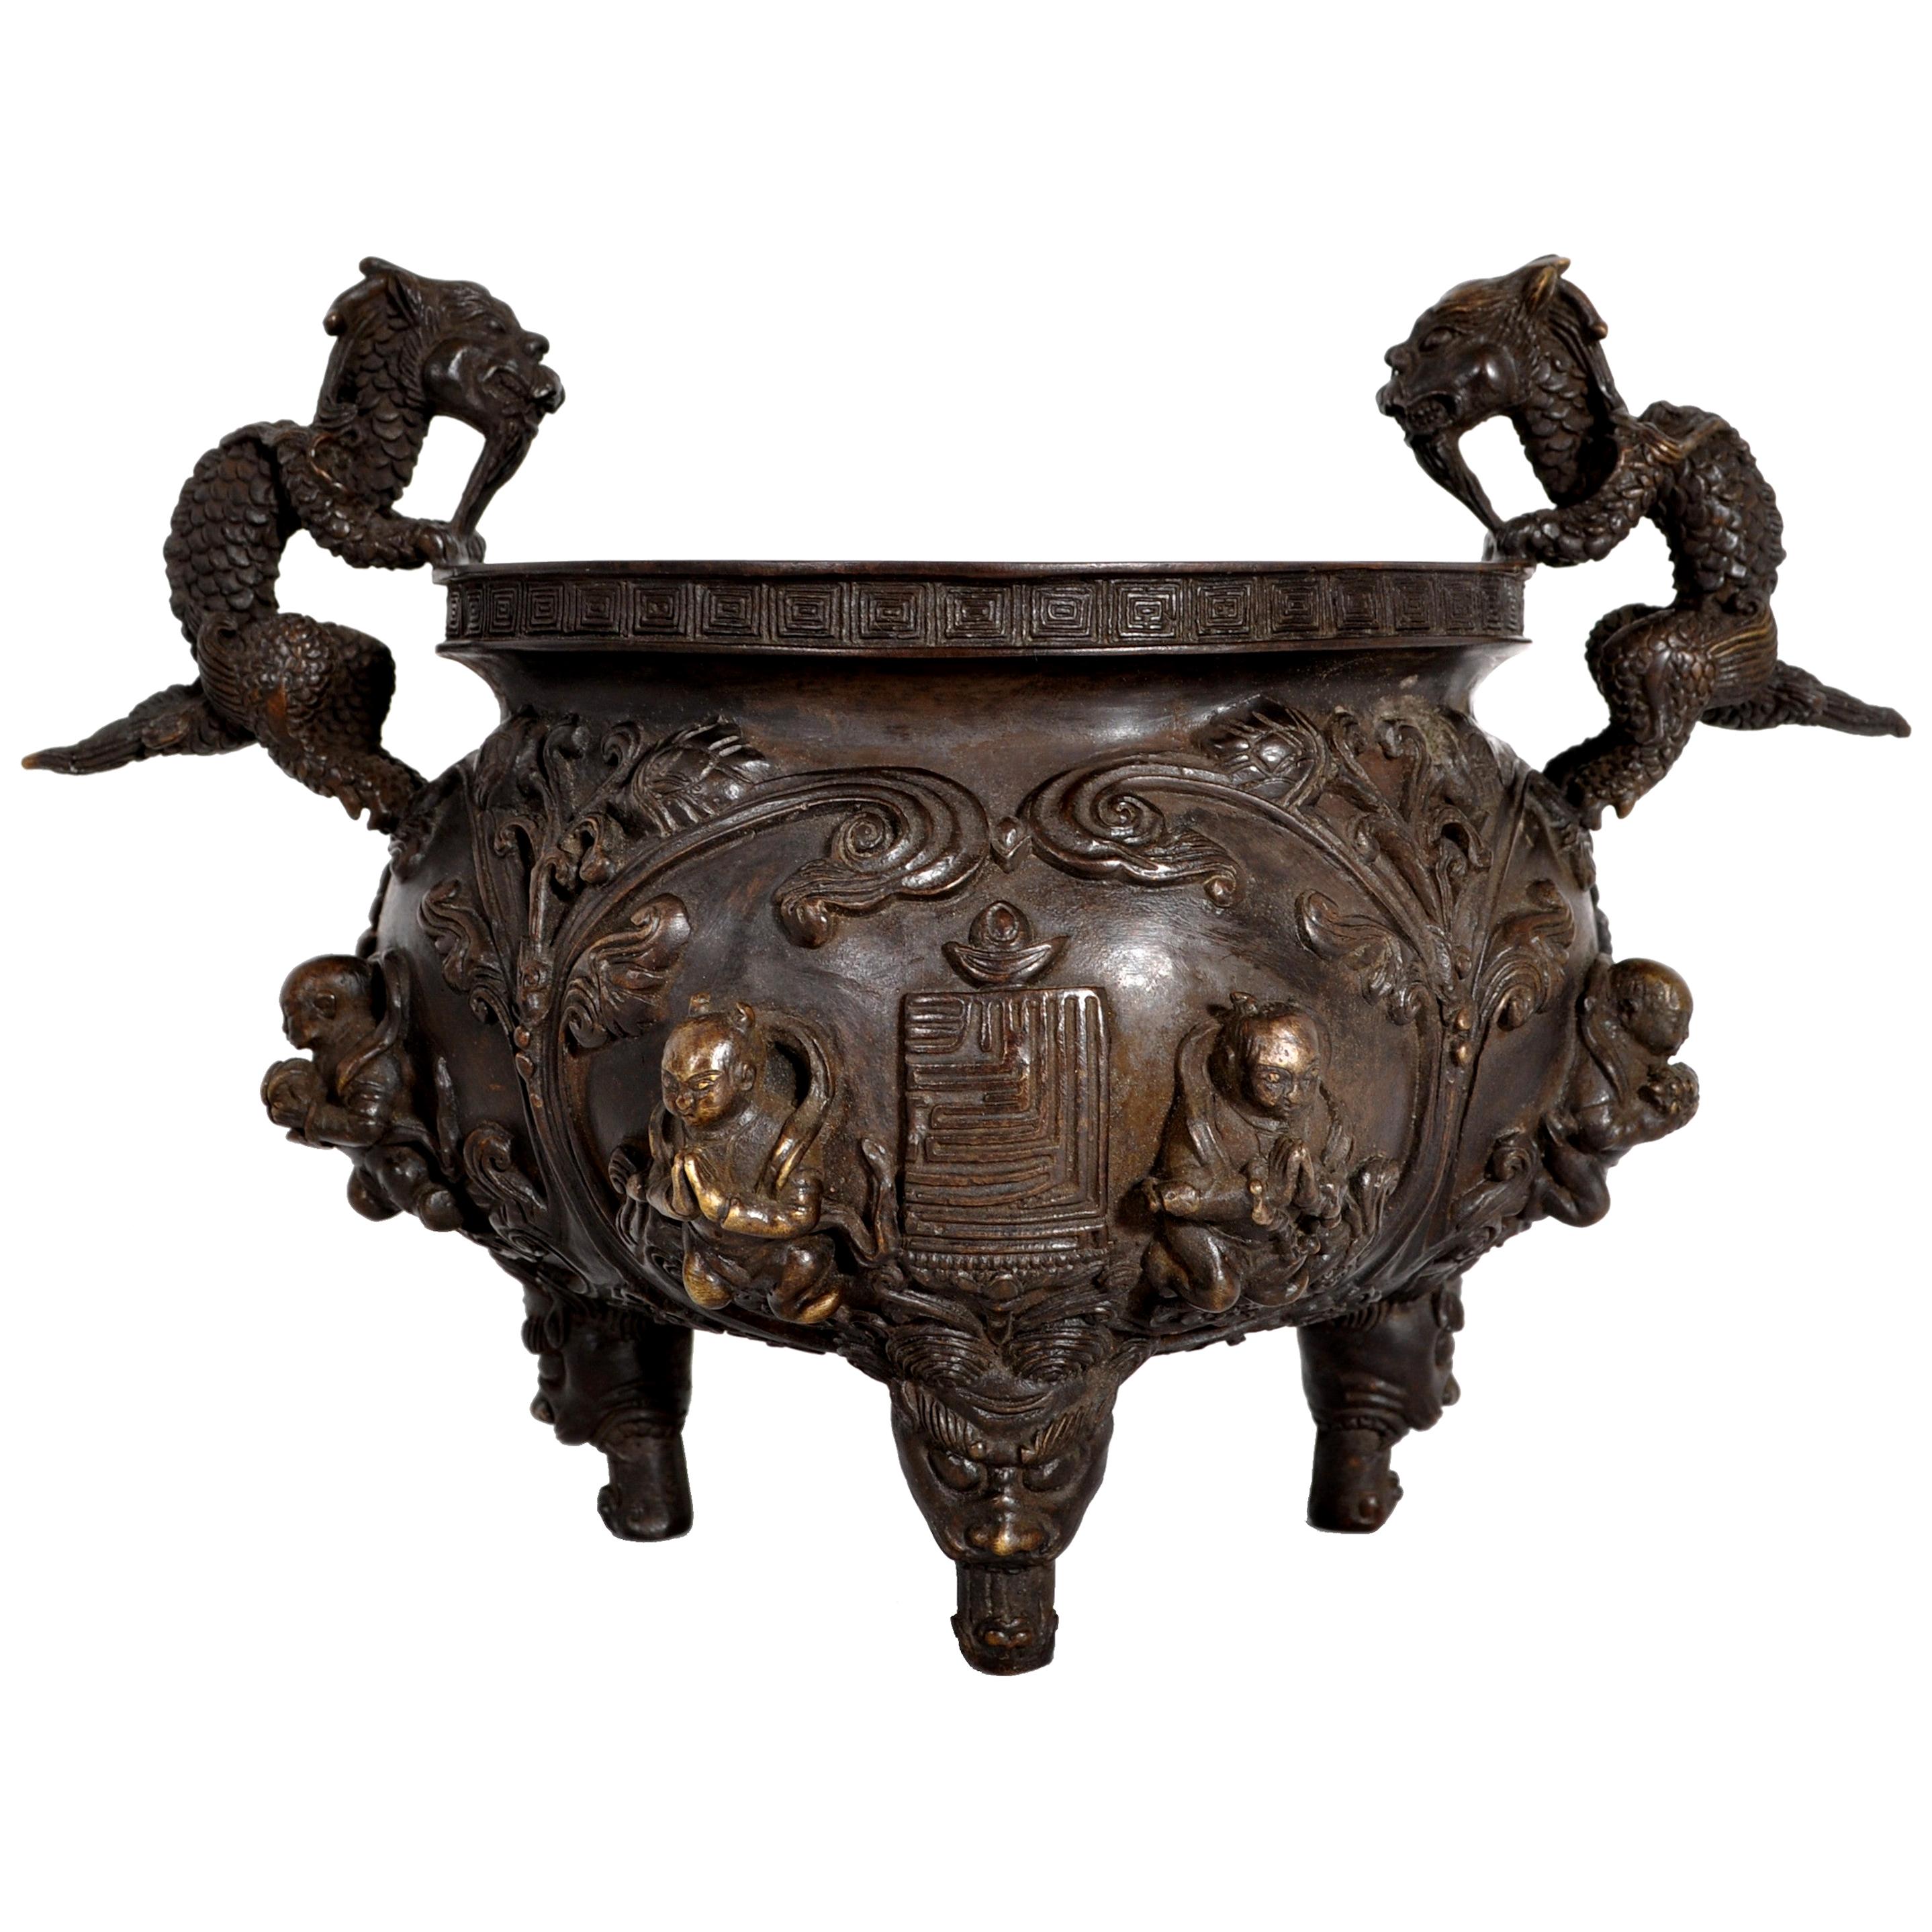 Antique Chinese Bronze Qing Dynasty Dragon Censer Incense Burner Buddhistic 1800